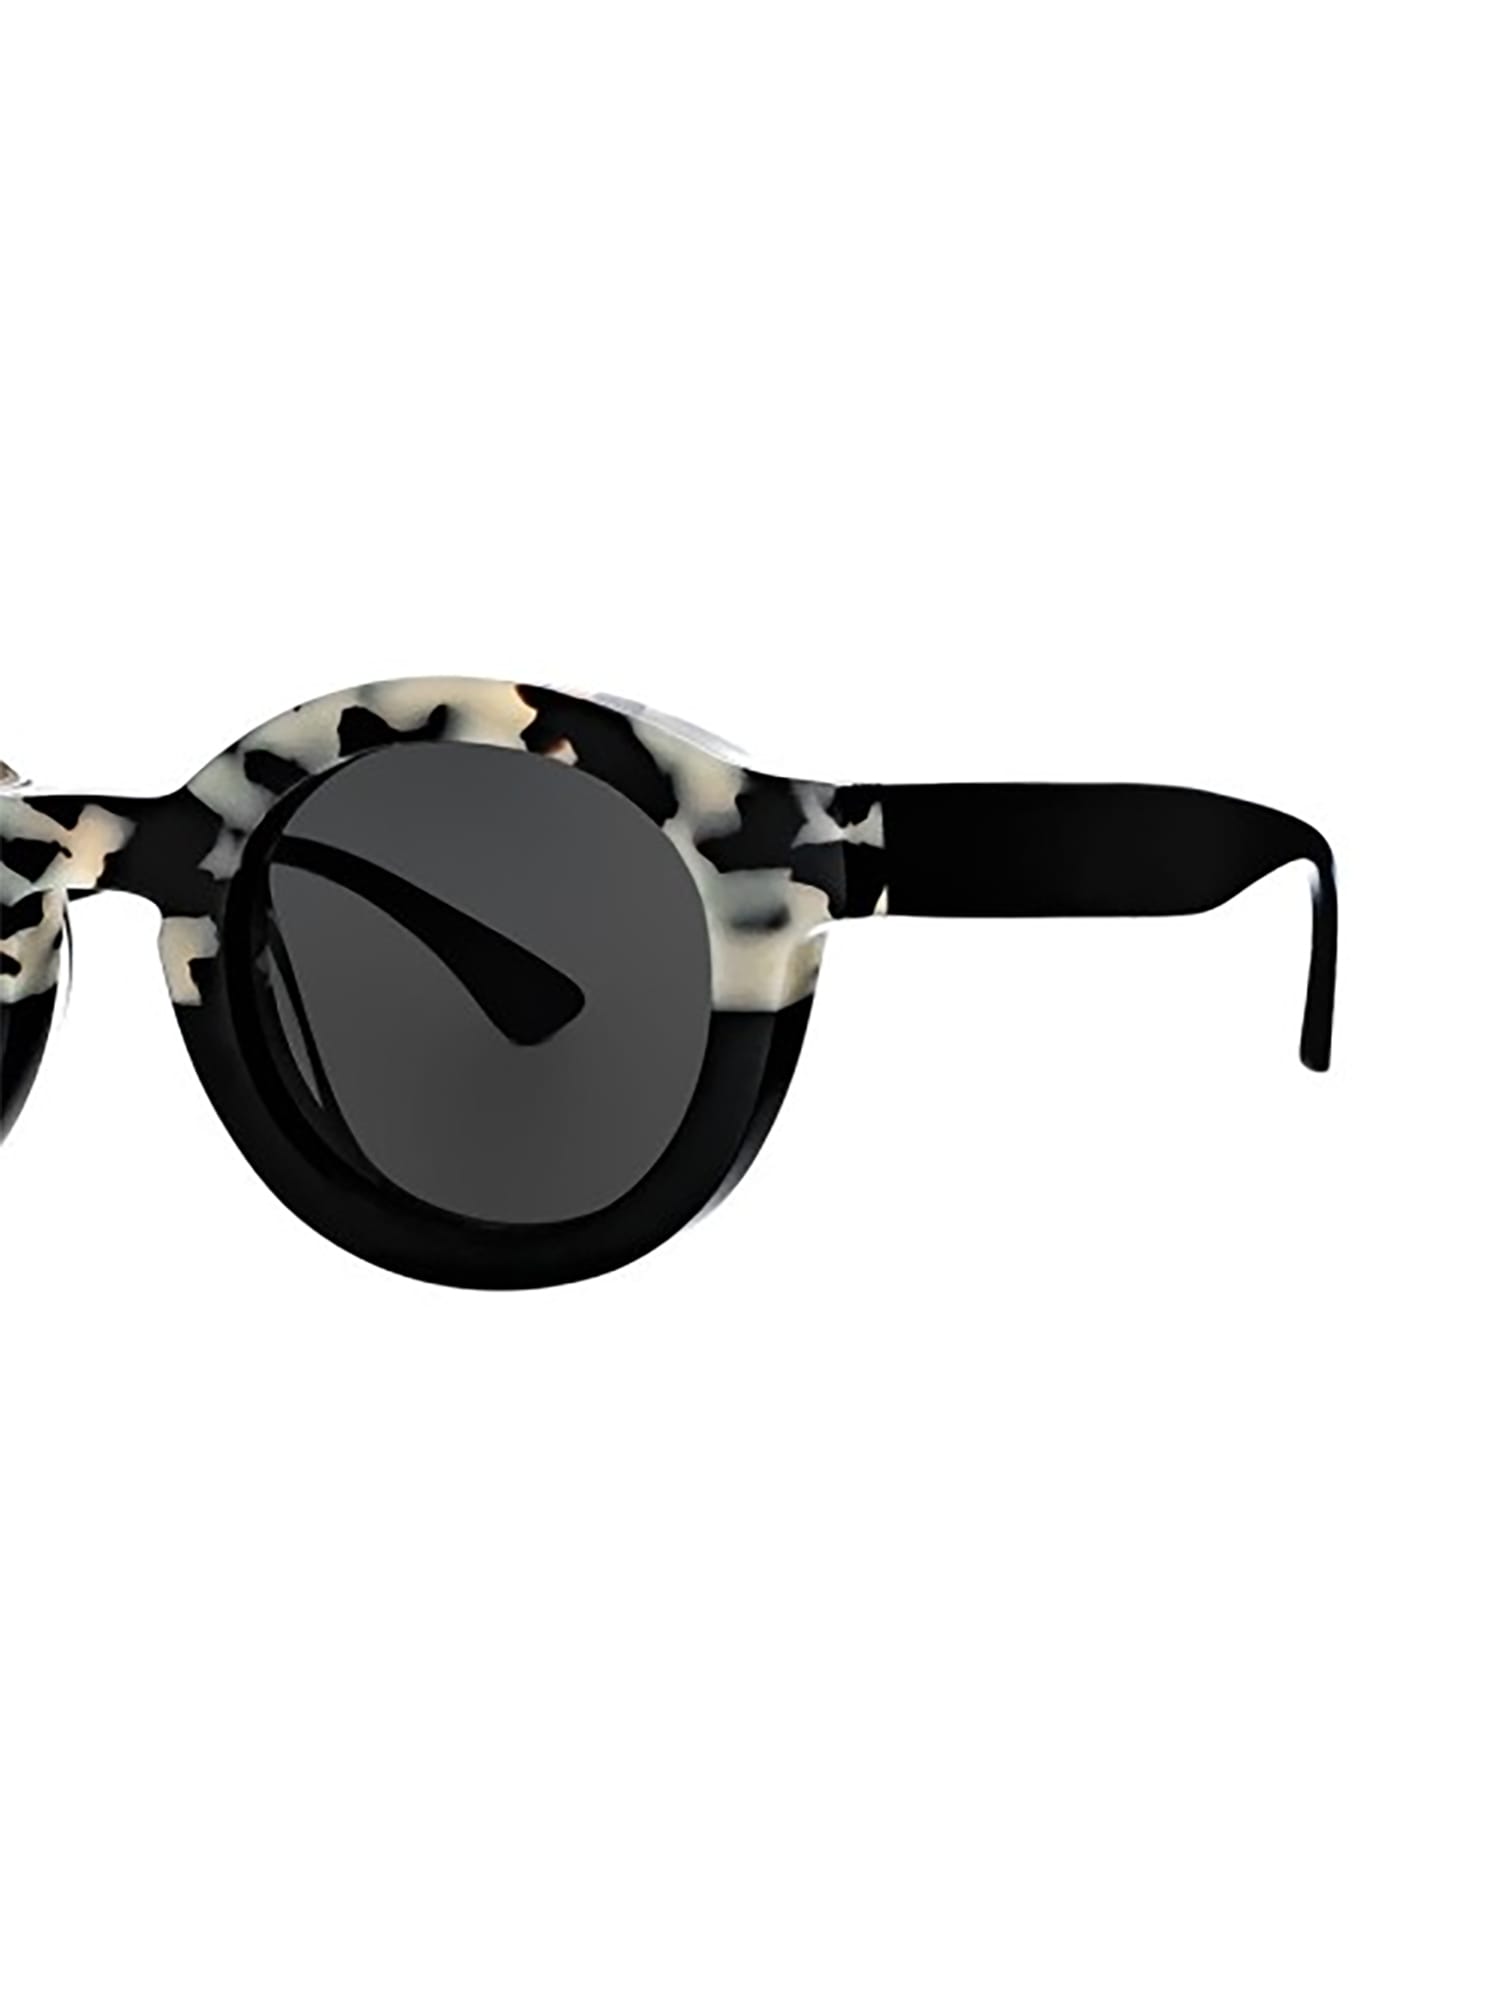 Shop Thierry Lasry Olympy Sunglasses